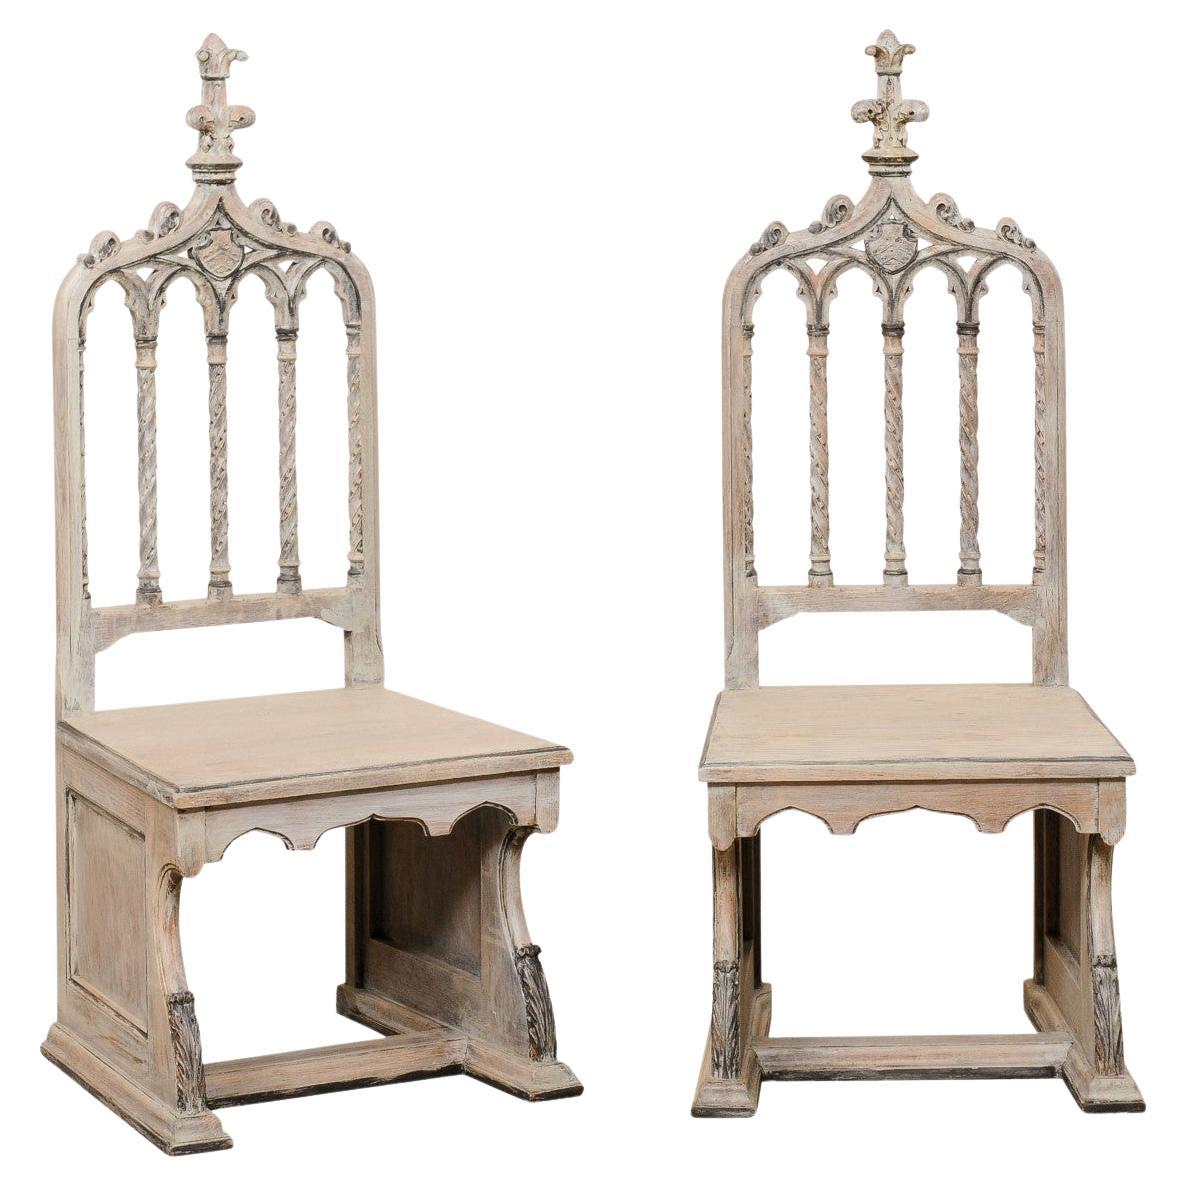 English Gothic Revival Style Pair Carved-Wood Chairs, Early 20th C For Sale